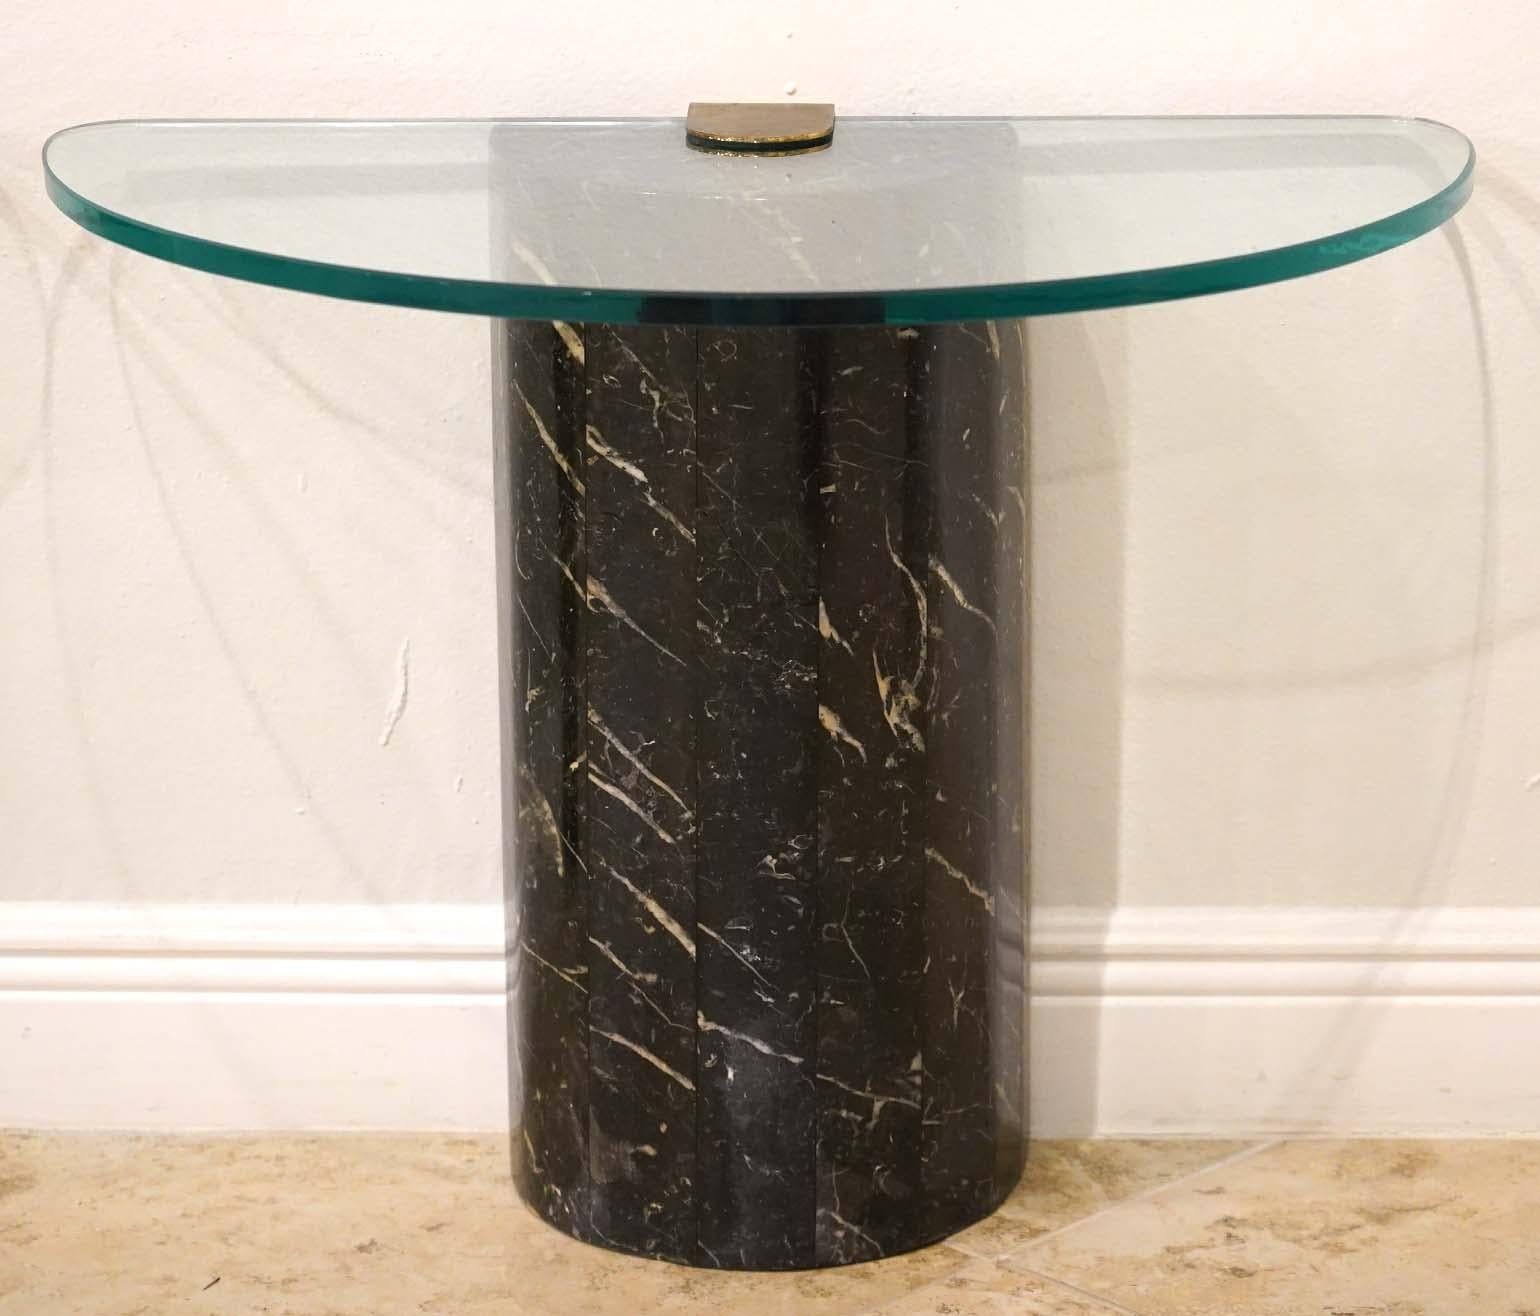 Pair of La Rosa, Florence Italian side tables. Made from marble, glass and brass. Sticker still applied. Marble has some minor cracks but is still structurally sound.